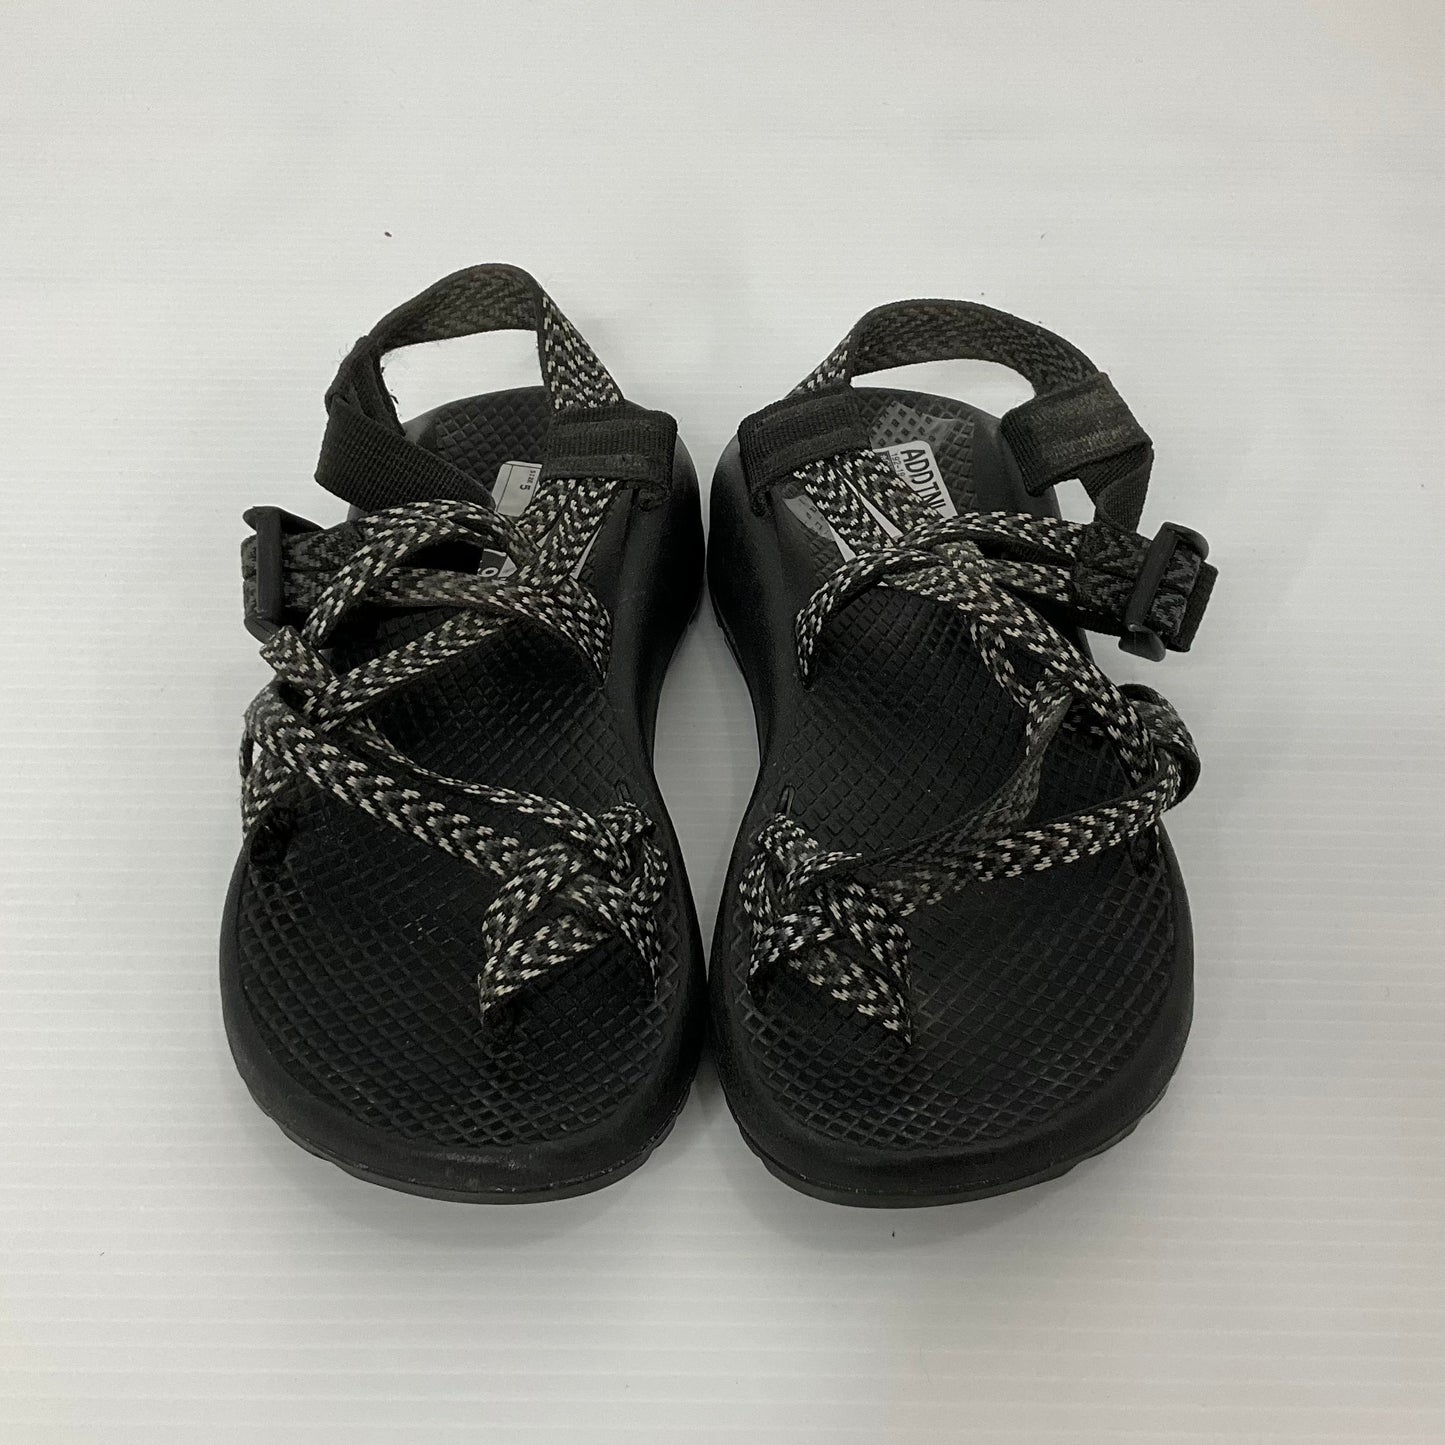 Black Sandals Flats Chacos, Size 5